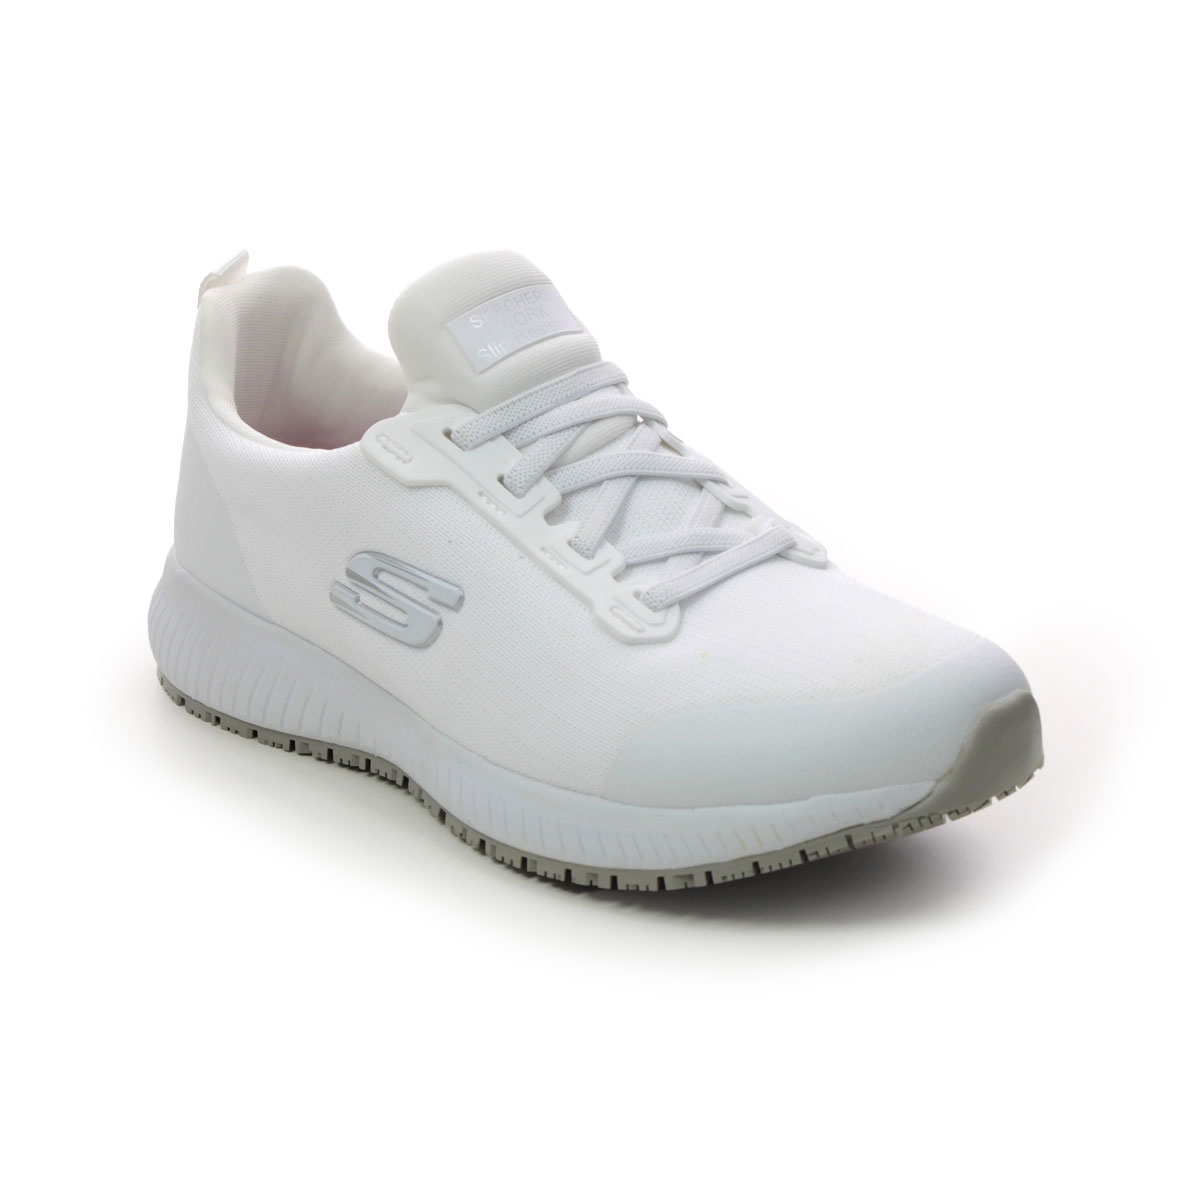 Skechers Work Squad Slip Resistant White Womens Trainers 77222Ec In Size 6.5 In Plain White